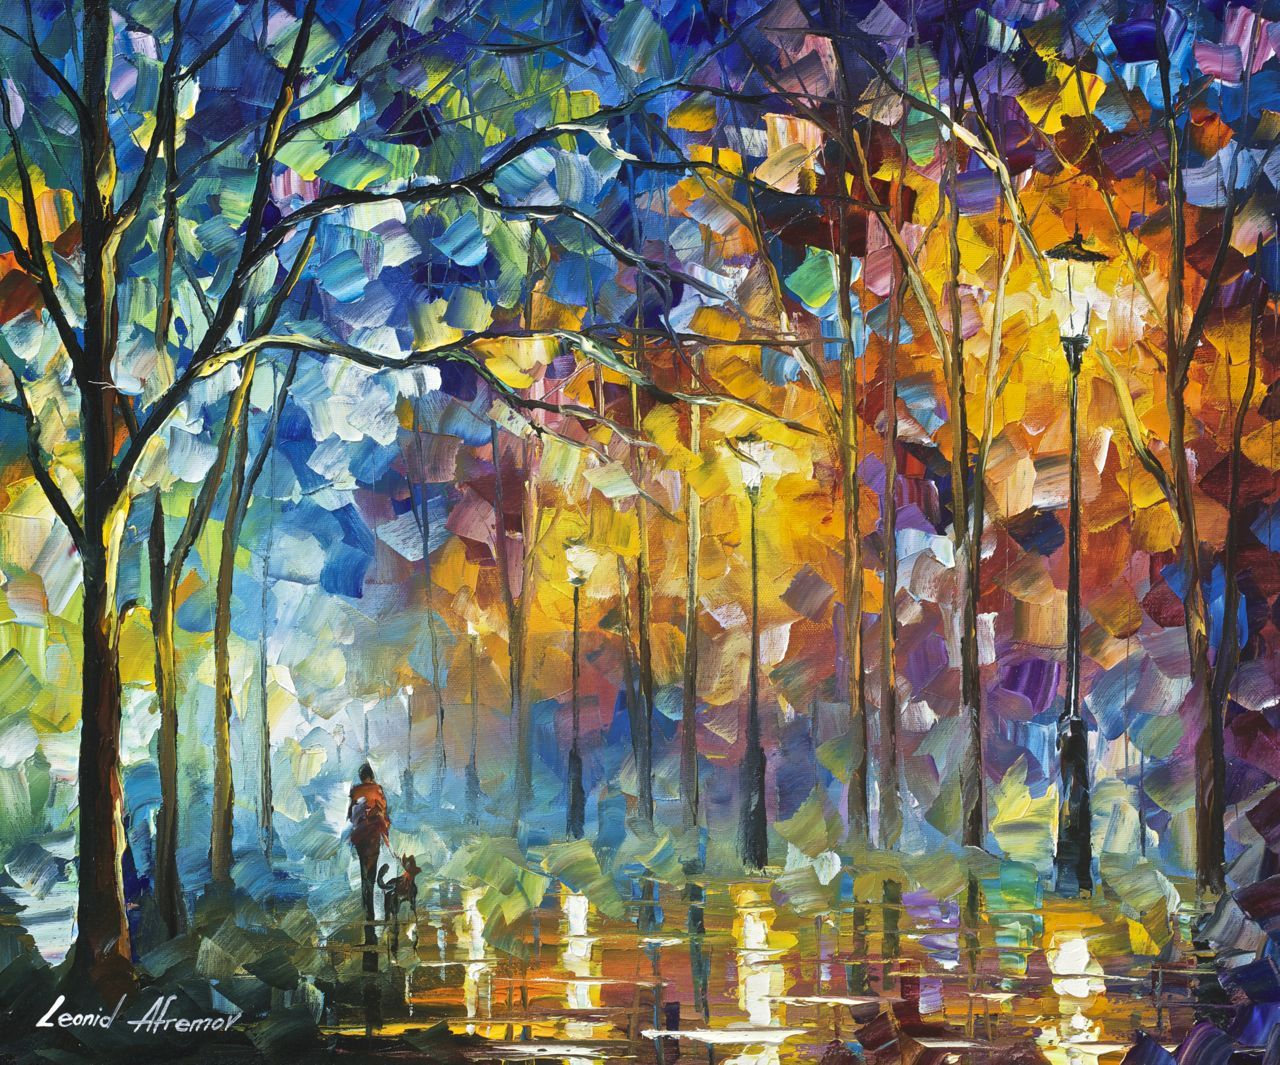 Friends Forever – Original Oil Painting – Wall Art Canvasleonid Afremov  – 54"X40" Regarding Oil Painting Wall Art (View 2 of 15)